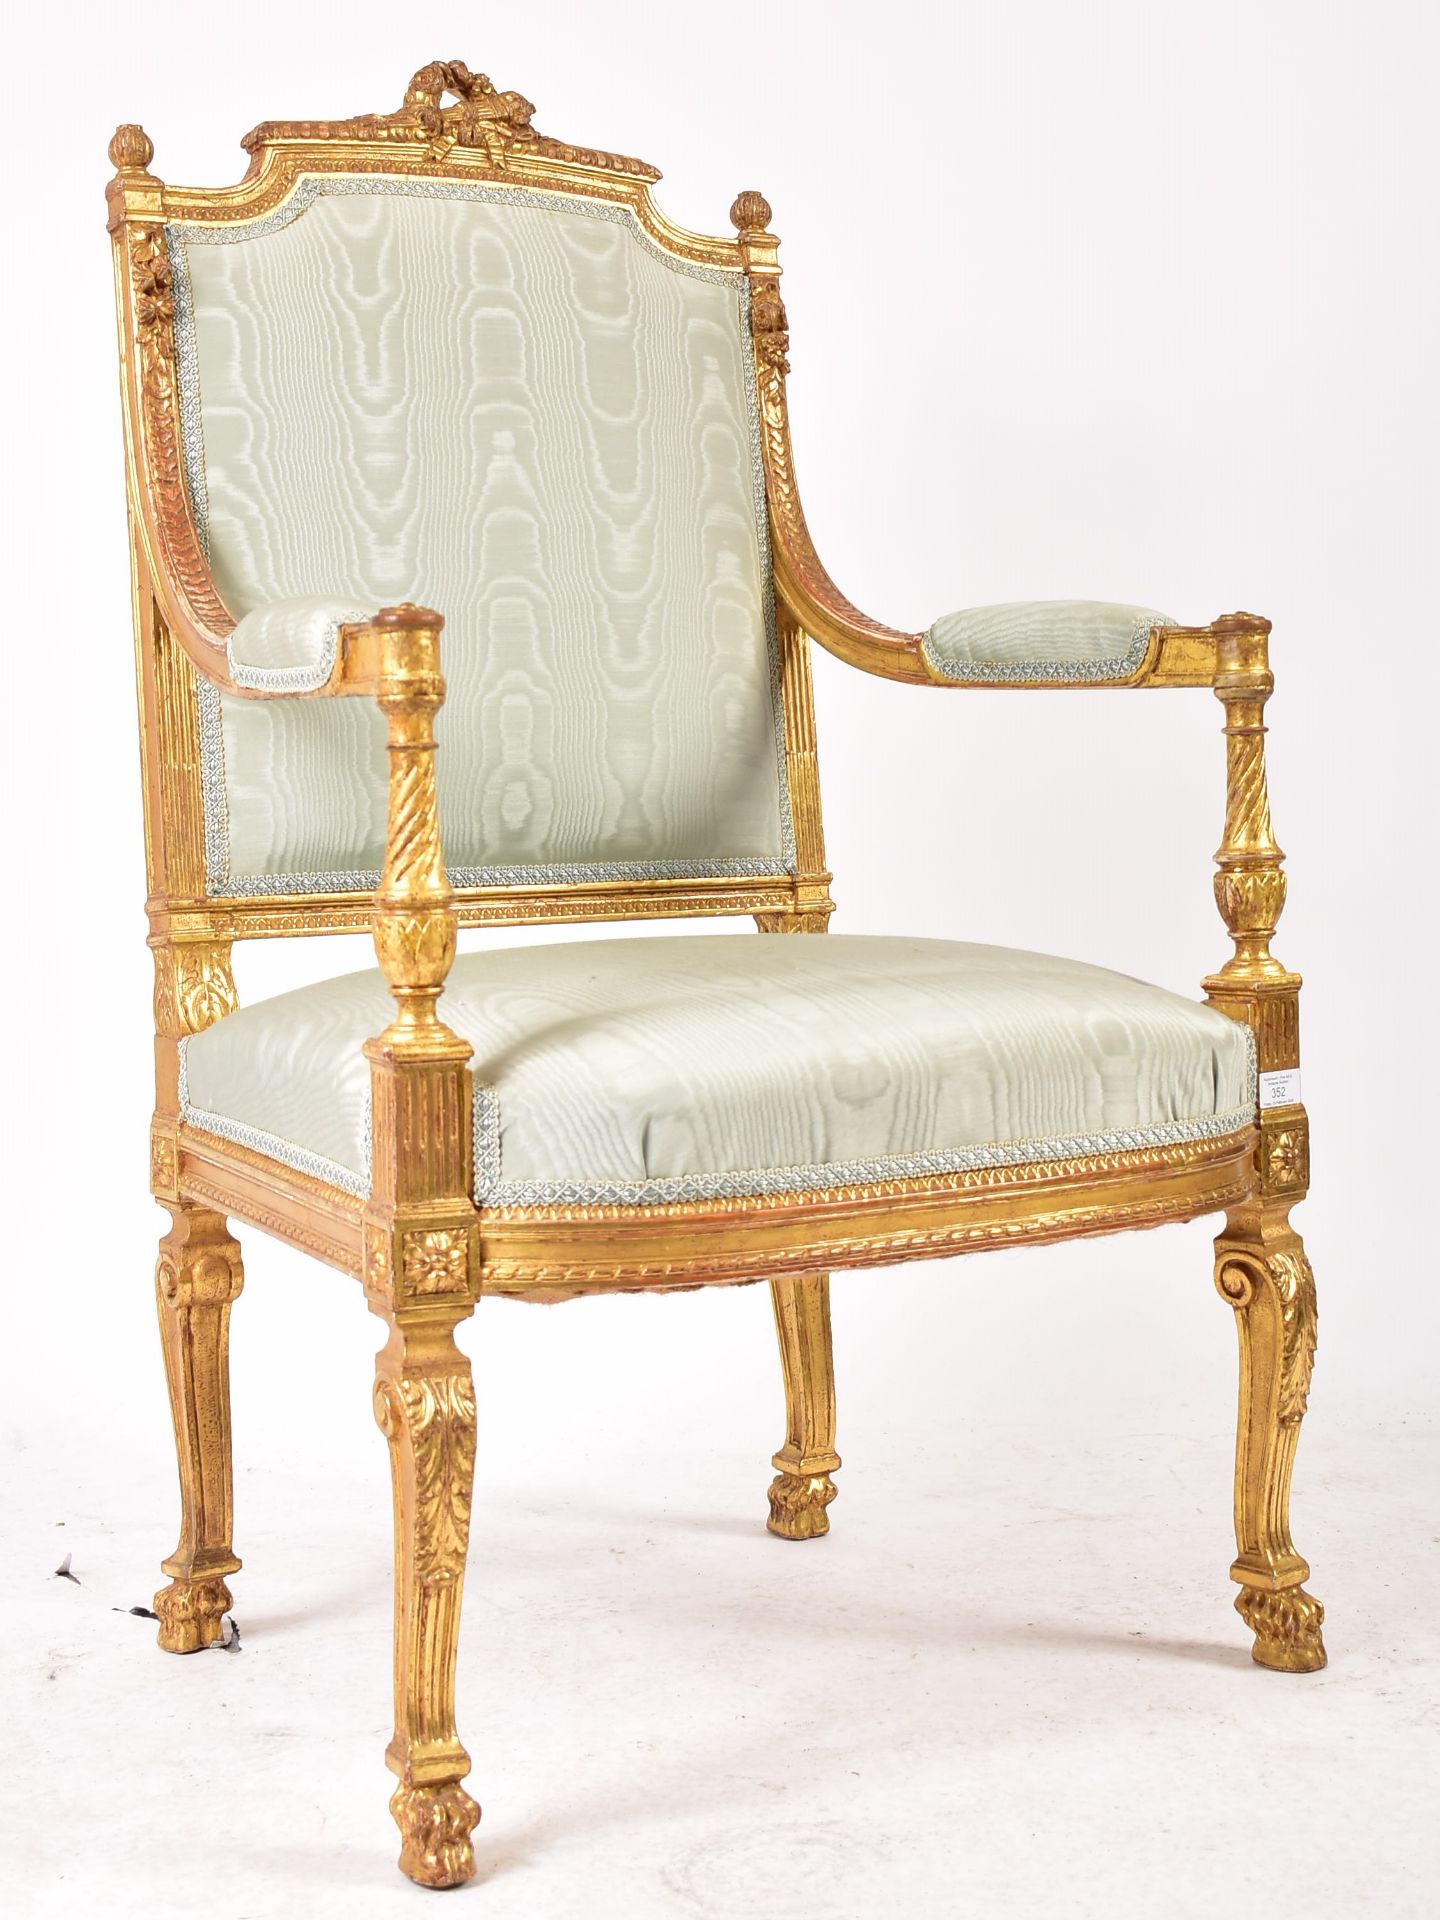 19TH CENTURY FRENCH LOUIS XVI STYLE GILT WOOD FAUTEUIL CHAIR